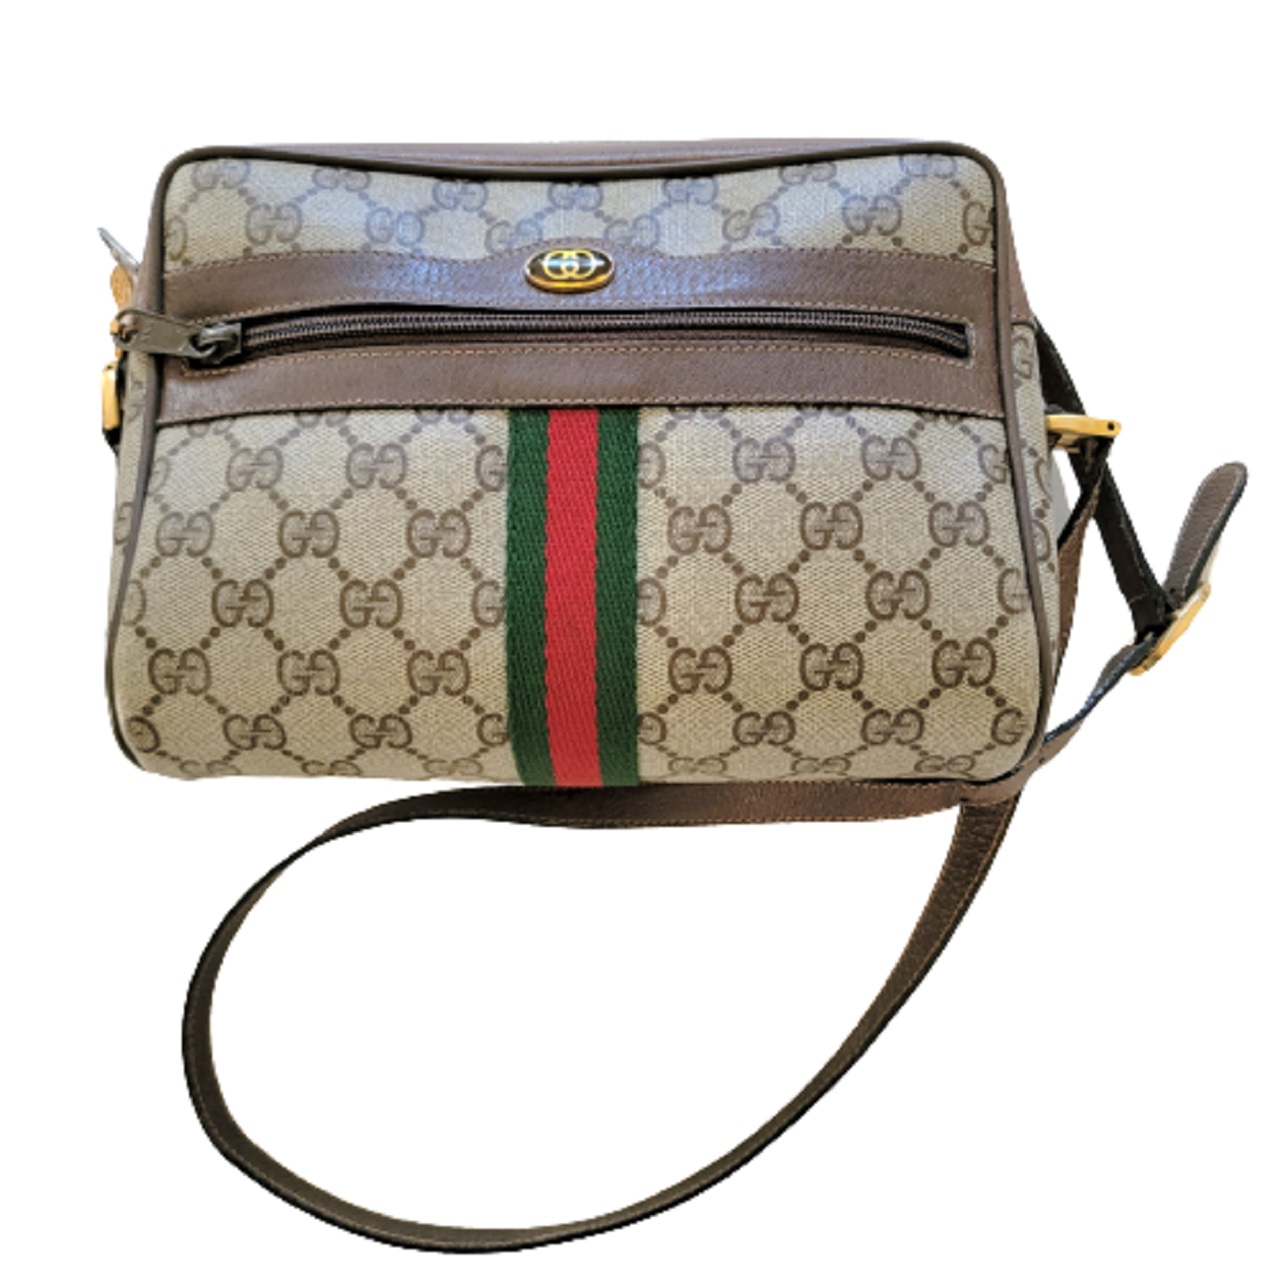 Gucci, Bags, Authentic Vintage Gucci Ophidia 98s Clutchcrossbody Bag Gg  Monogram W